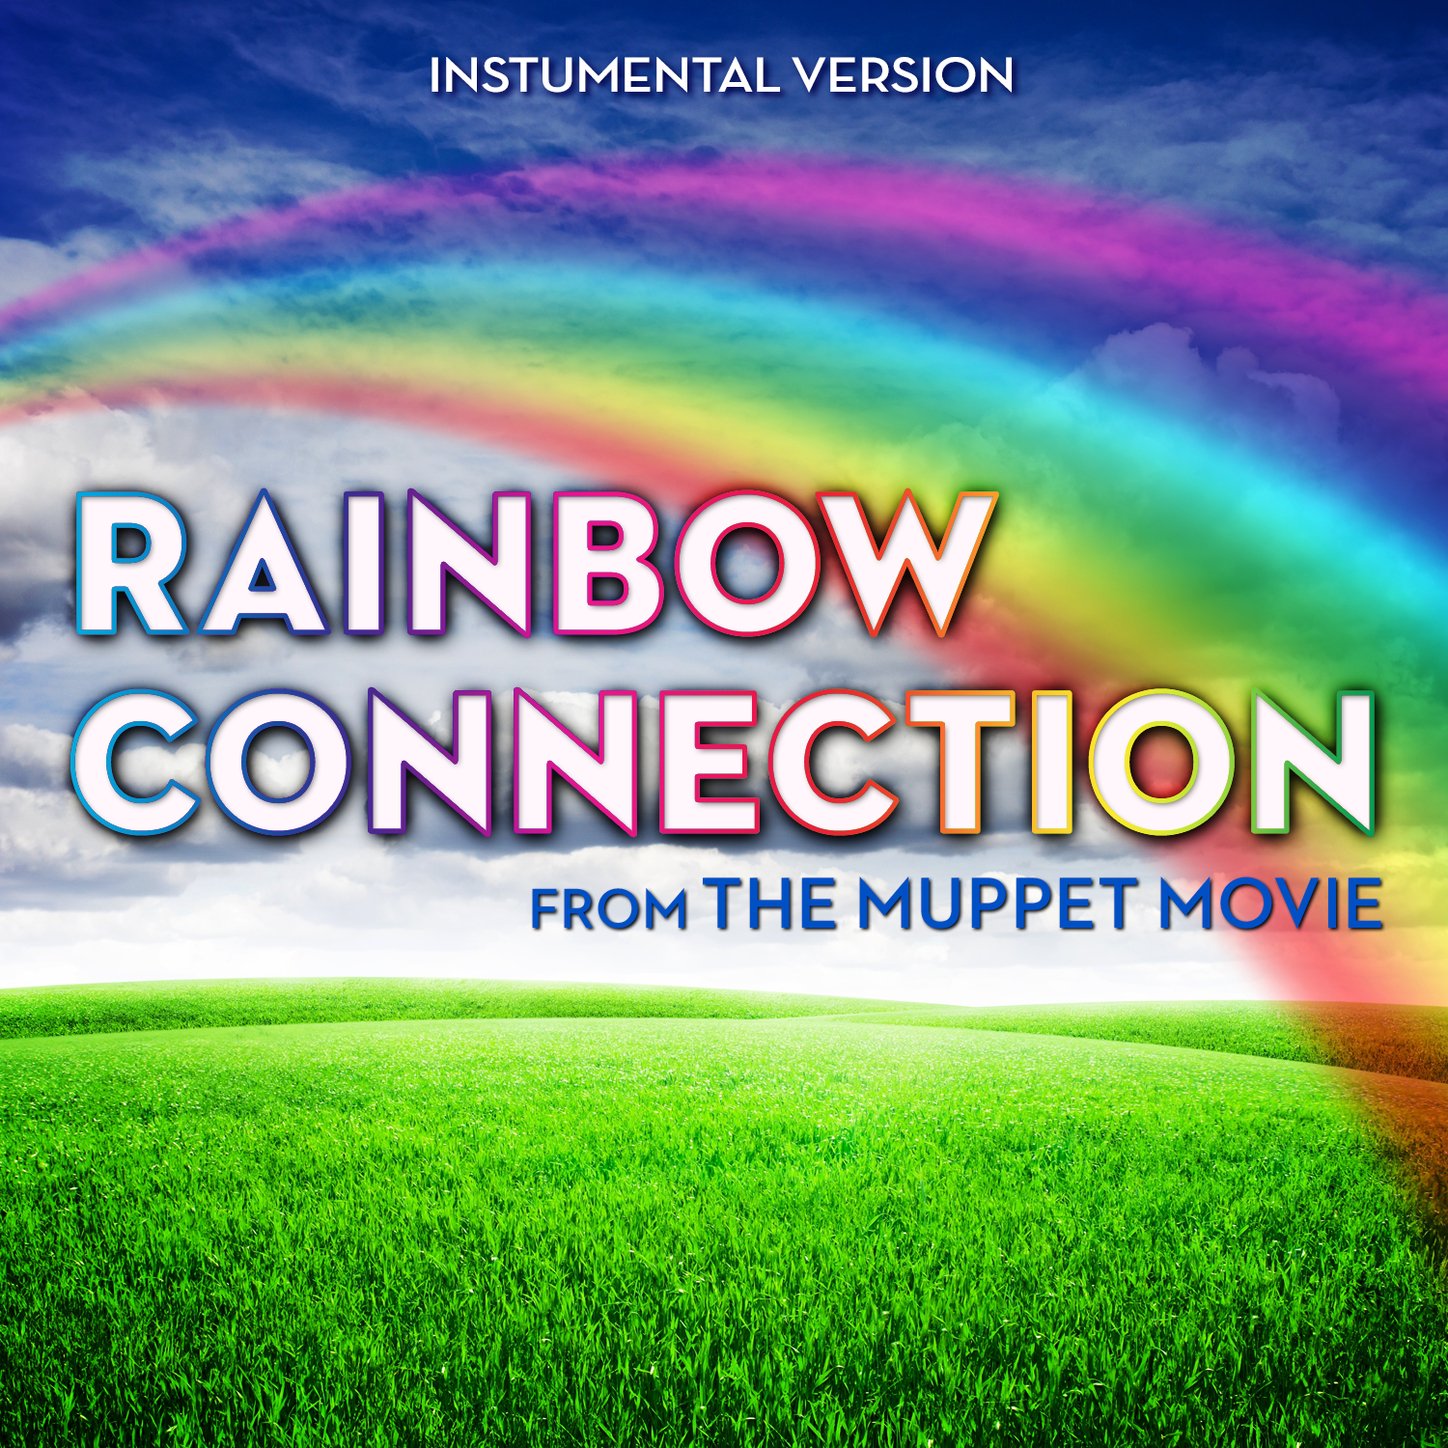 Song lyrics to Rainbow Connection, written by Kenny Ascher, Paul Williams, performed in The Muppet Movie